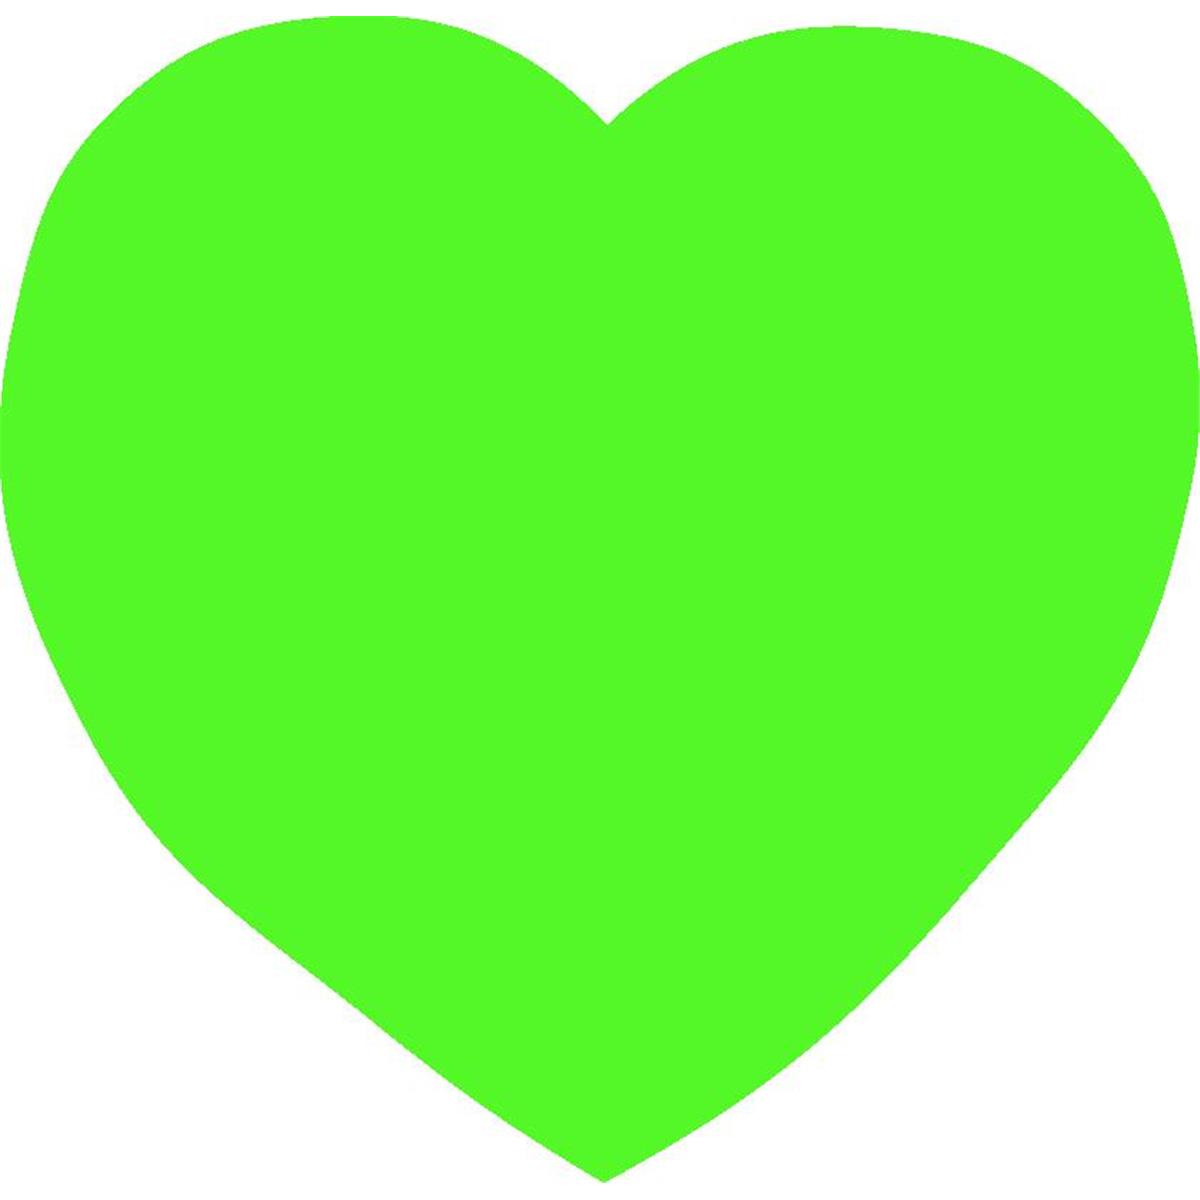 Se-0995 4.5 X 4 In. Small Single Color Sticky Shape Notepad, Green Heart - 50 Sheets Per Pack